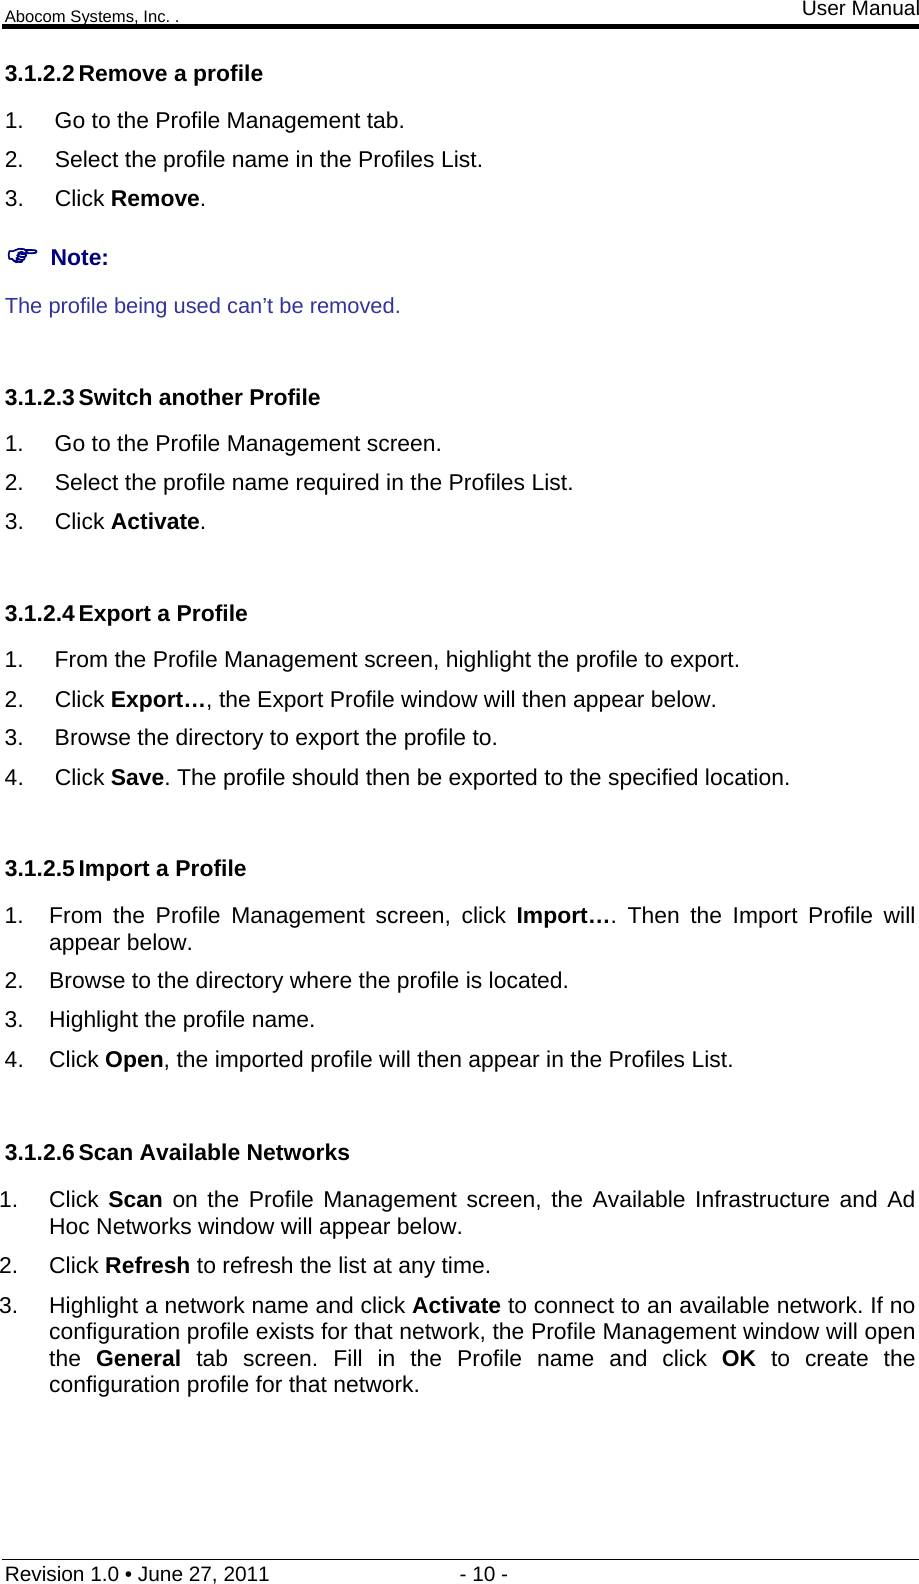 Abocom Systems, Inc. . User Manual Revision 1.0 • June 27, 2011                                 - 10 -                                                                3.1.2.2 Remove a profile 1.  Go to the Profile Management tab. 2.  Select the profile name in the Profiles List. 3. Click Remove.  Note: The profile being used can’t be removed.  3.1.2.3 Switch another Profile 1.  Go to the Profile Management screen. 2.  Select the profile name required in the Profiles List. 3. Click Activate.  3.1.2.4 Export a Profile 1.  From the Profile Management screen, highlight the profile to export. 2. Click Export…, the Export Profile window will then appear below. 3.  Browse the directory to export the profile to. 4. Click Save. The profile should then be exported to the specified location.  3.1.2.5 Import a Profile 1.  From the Profile Management screen, click Import…. Then the Import Profile will appear below. 2.  Browse to the directory where the profile is located. 3.  Highlight the profile name. 4. Click Open, the imported profile will then appear in the Profiles List.  3.1.2.6 Scan Available Networks 1. Click Scan on the Profile Management screen, the Available Infrastructure and Ad Hoc Networks window will appear below. 2. Click Refresh to refresh the list at any time. 3.  Highlight a network name and click Activate to connect to an available network. If no configuration profile exists for that network, the Profile Management window will open the  General tab screen. Fill in the Profile name and click OK to create the configuration profile for that network.  